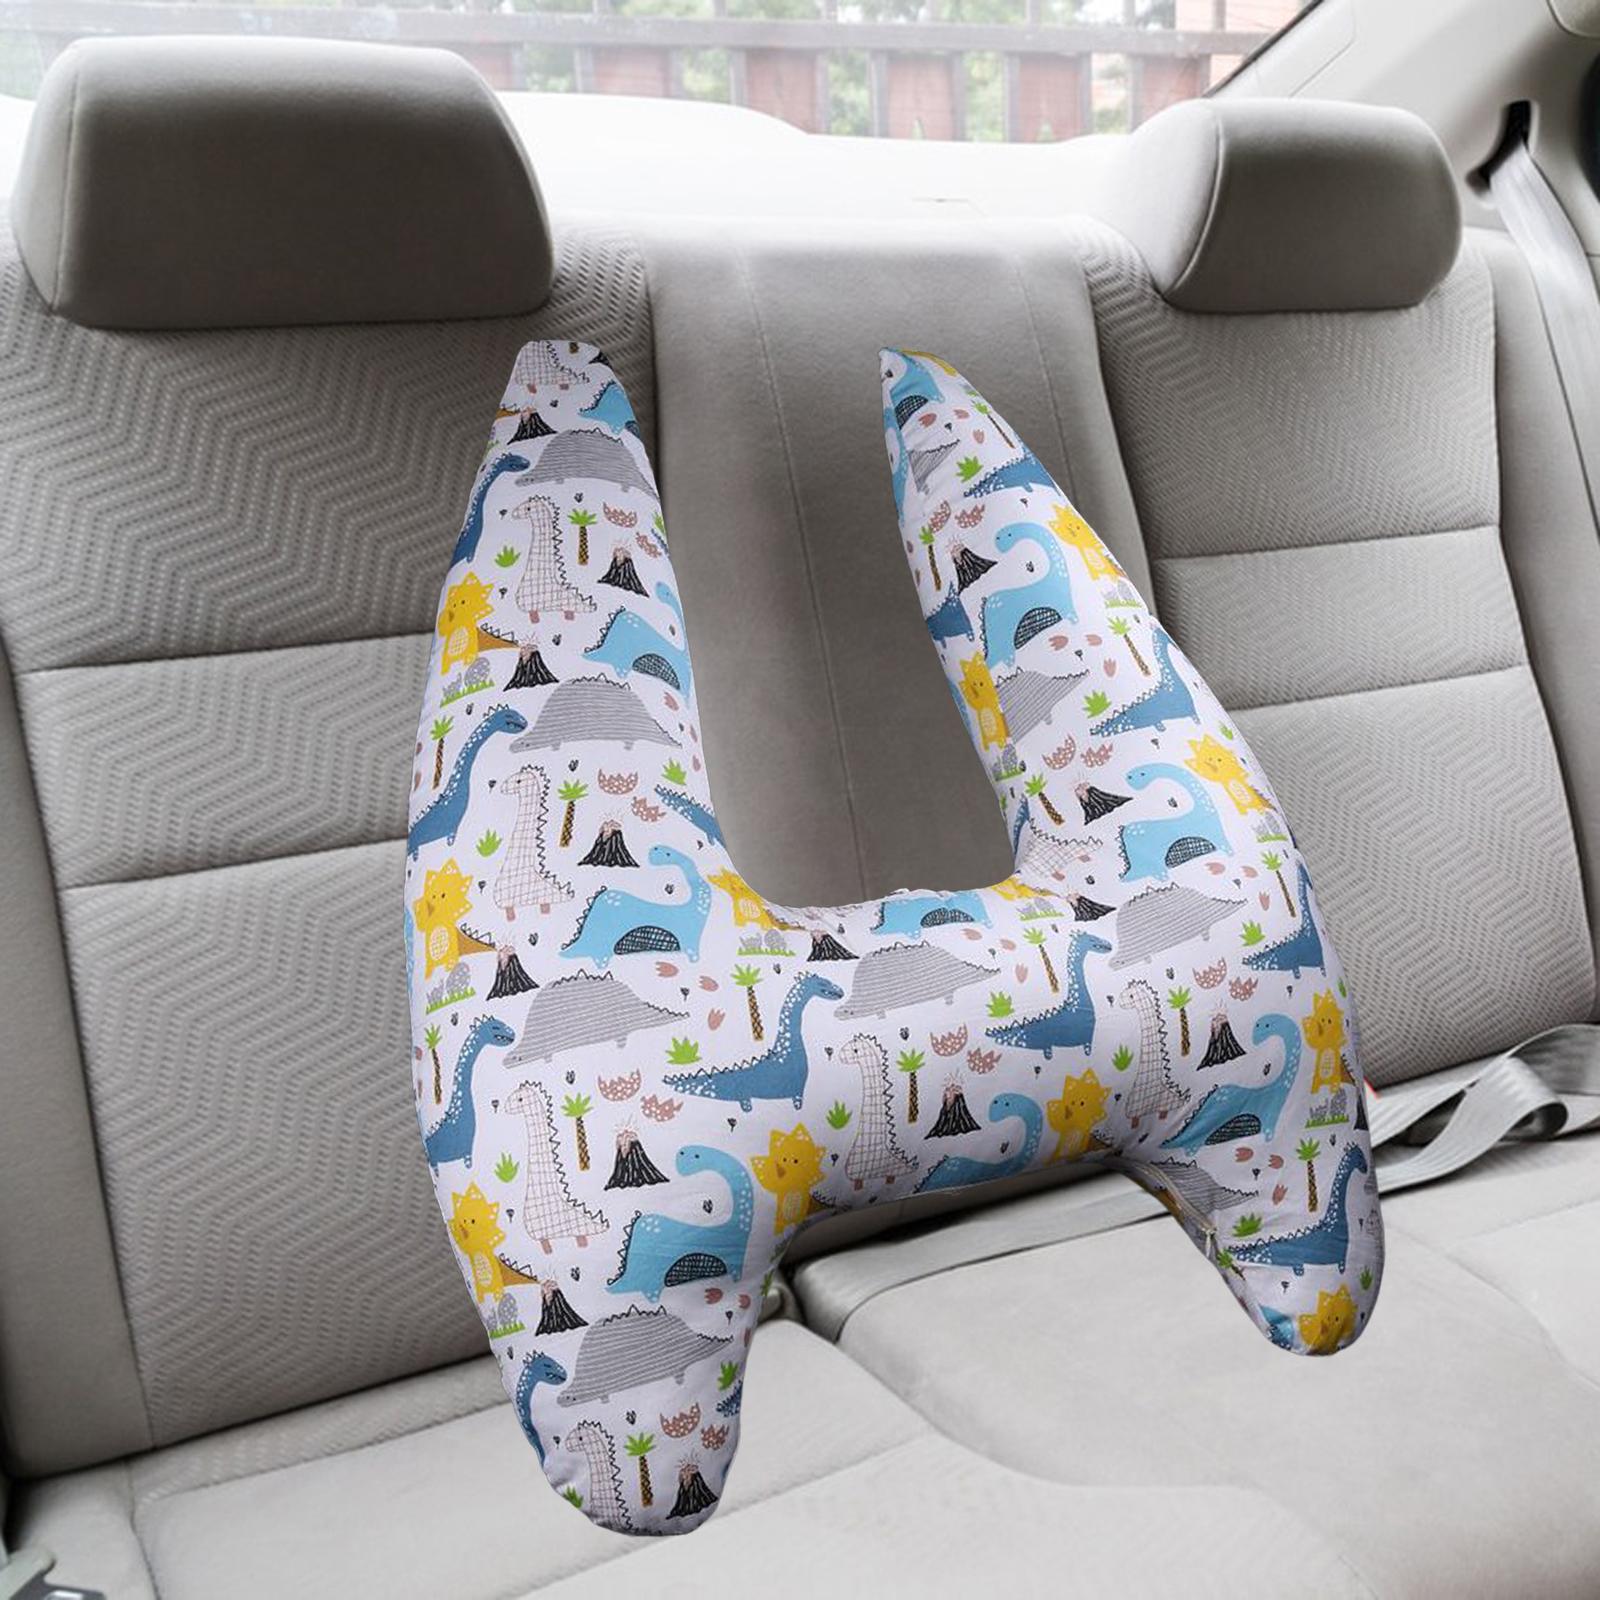 Car Back Seat Travel Pillow Provides Head and Body Support Sleeping Pillow White Dinosaur